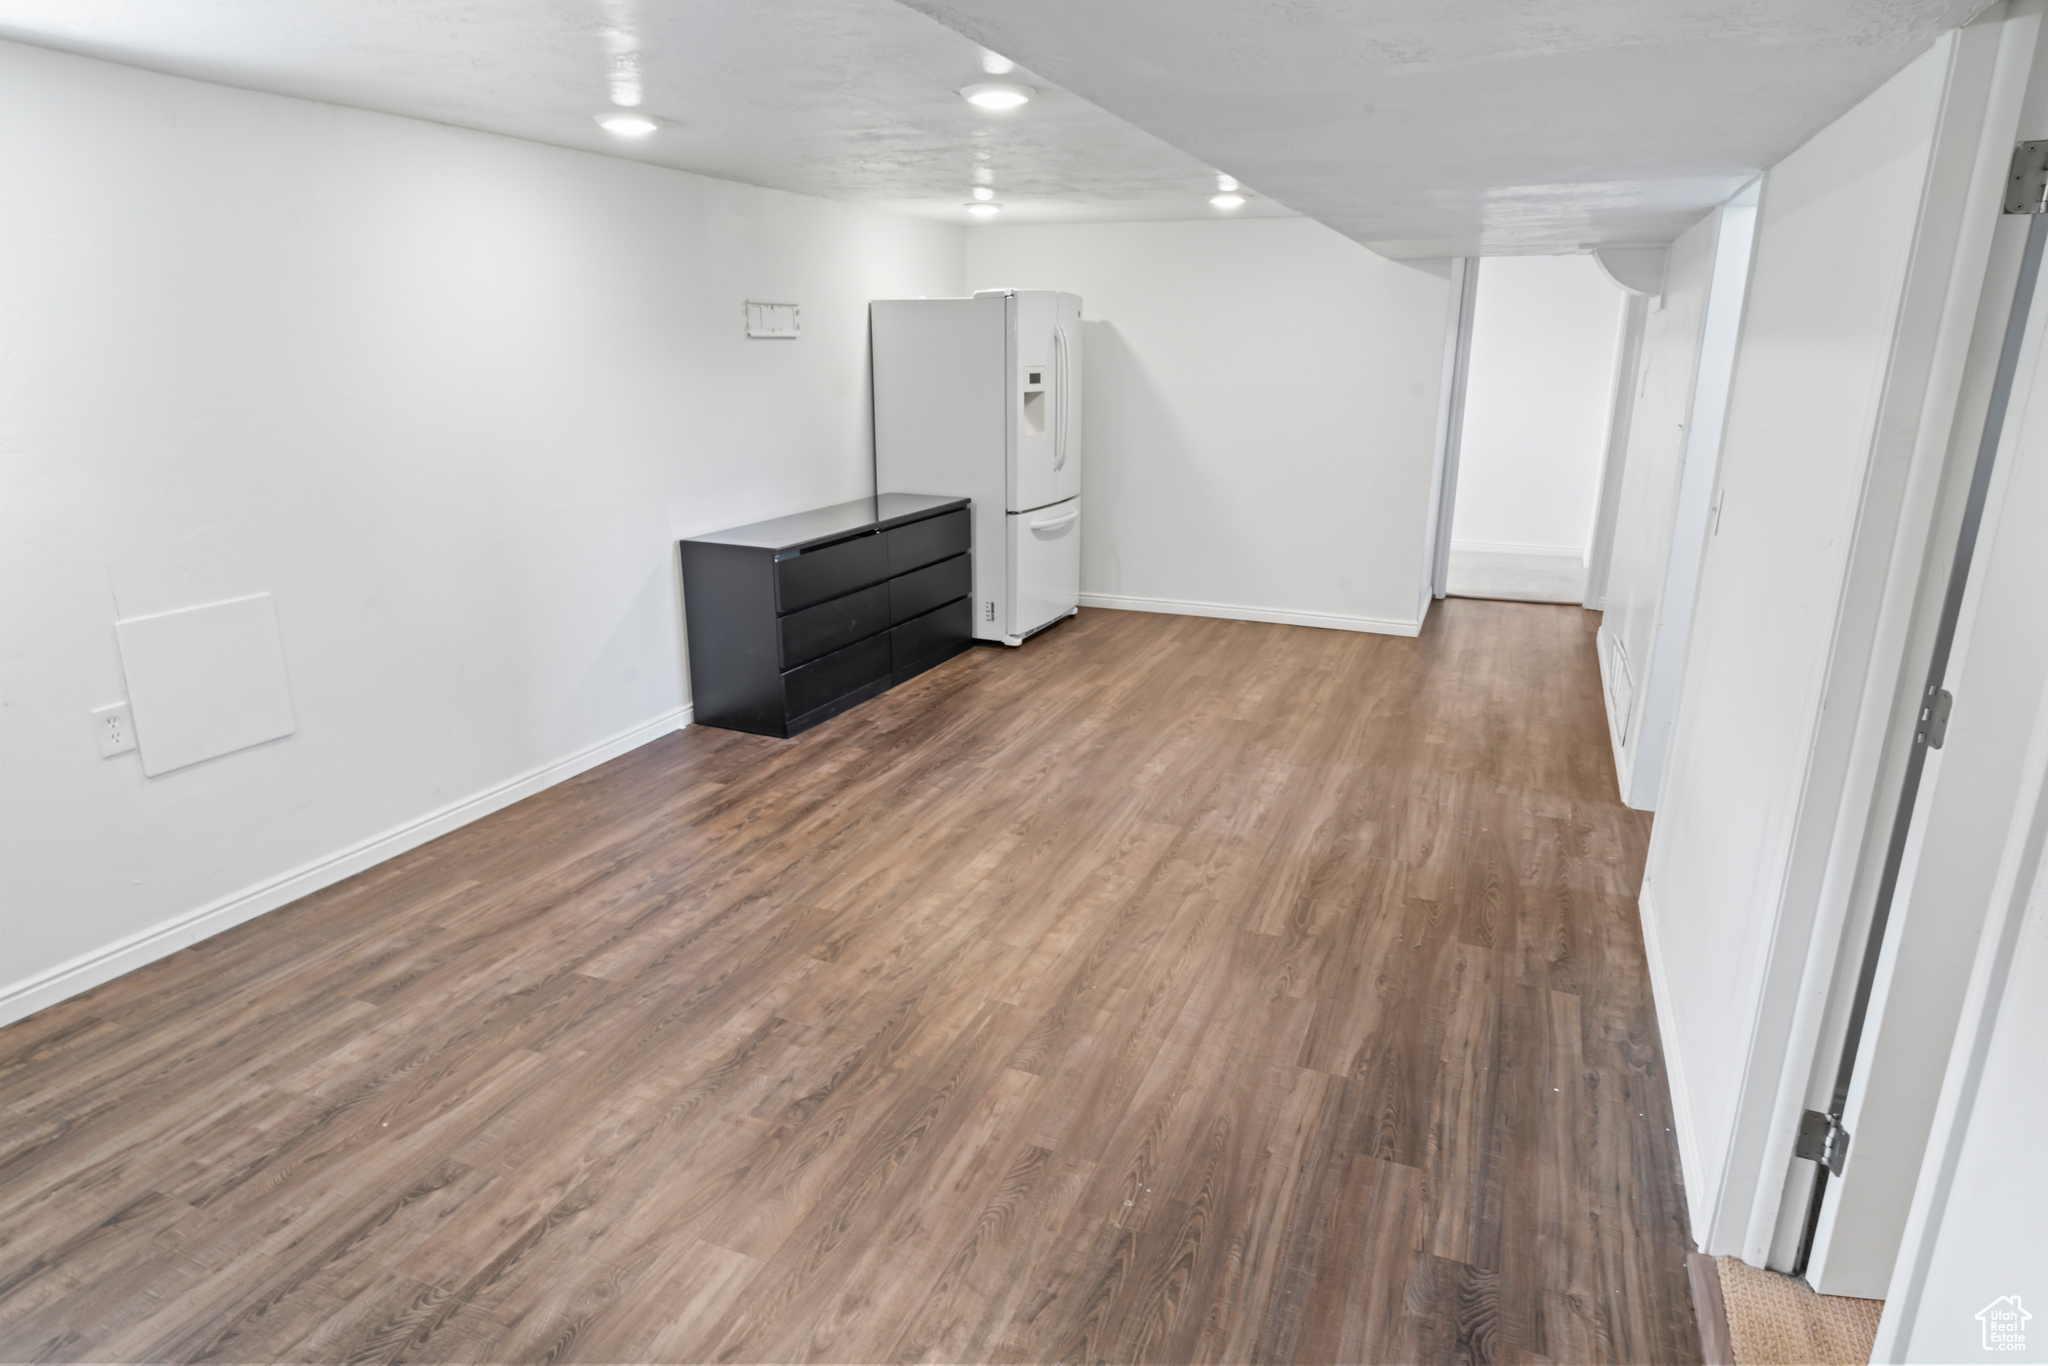 Basement featuring white fridge with ice dispenser and light wood-type flooring